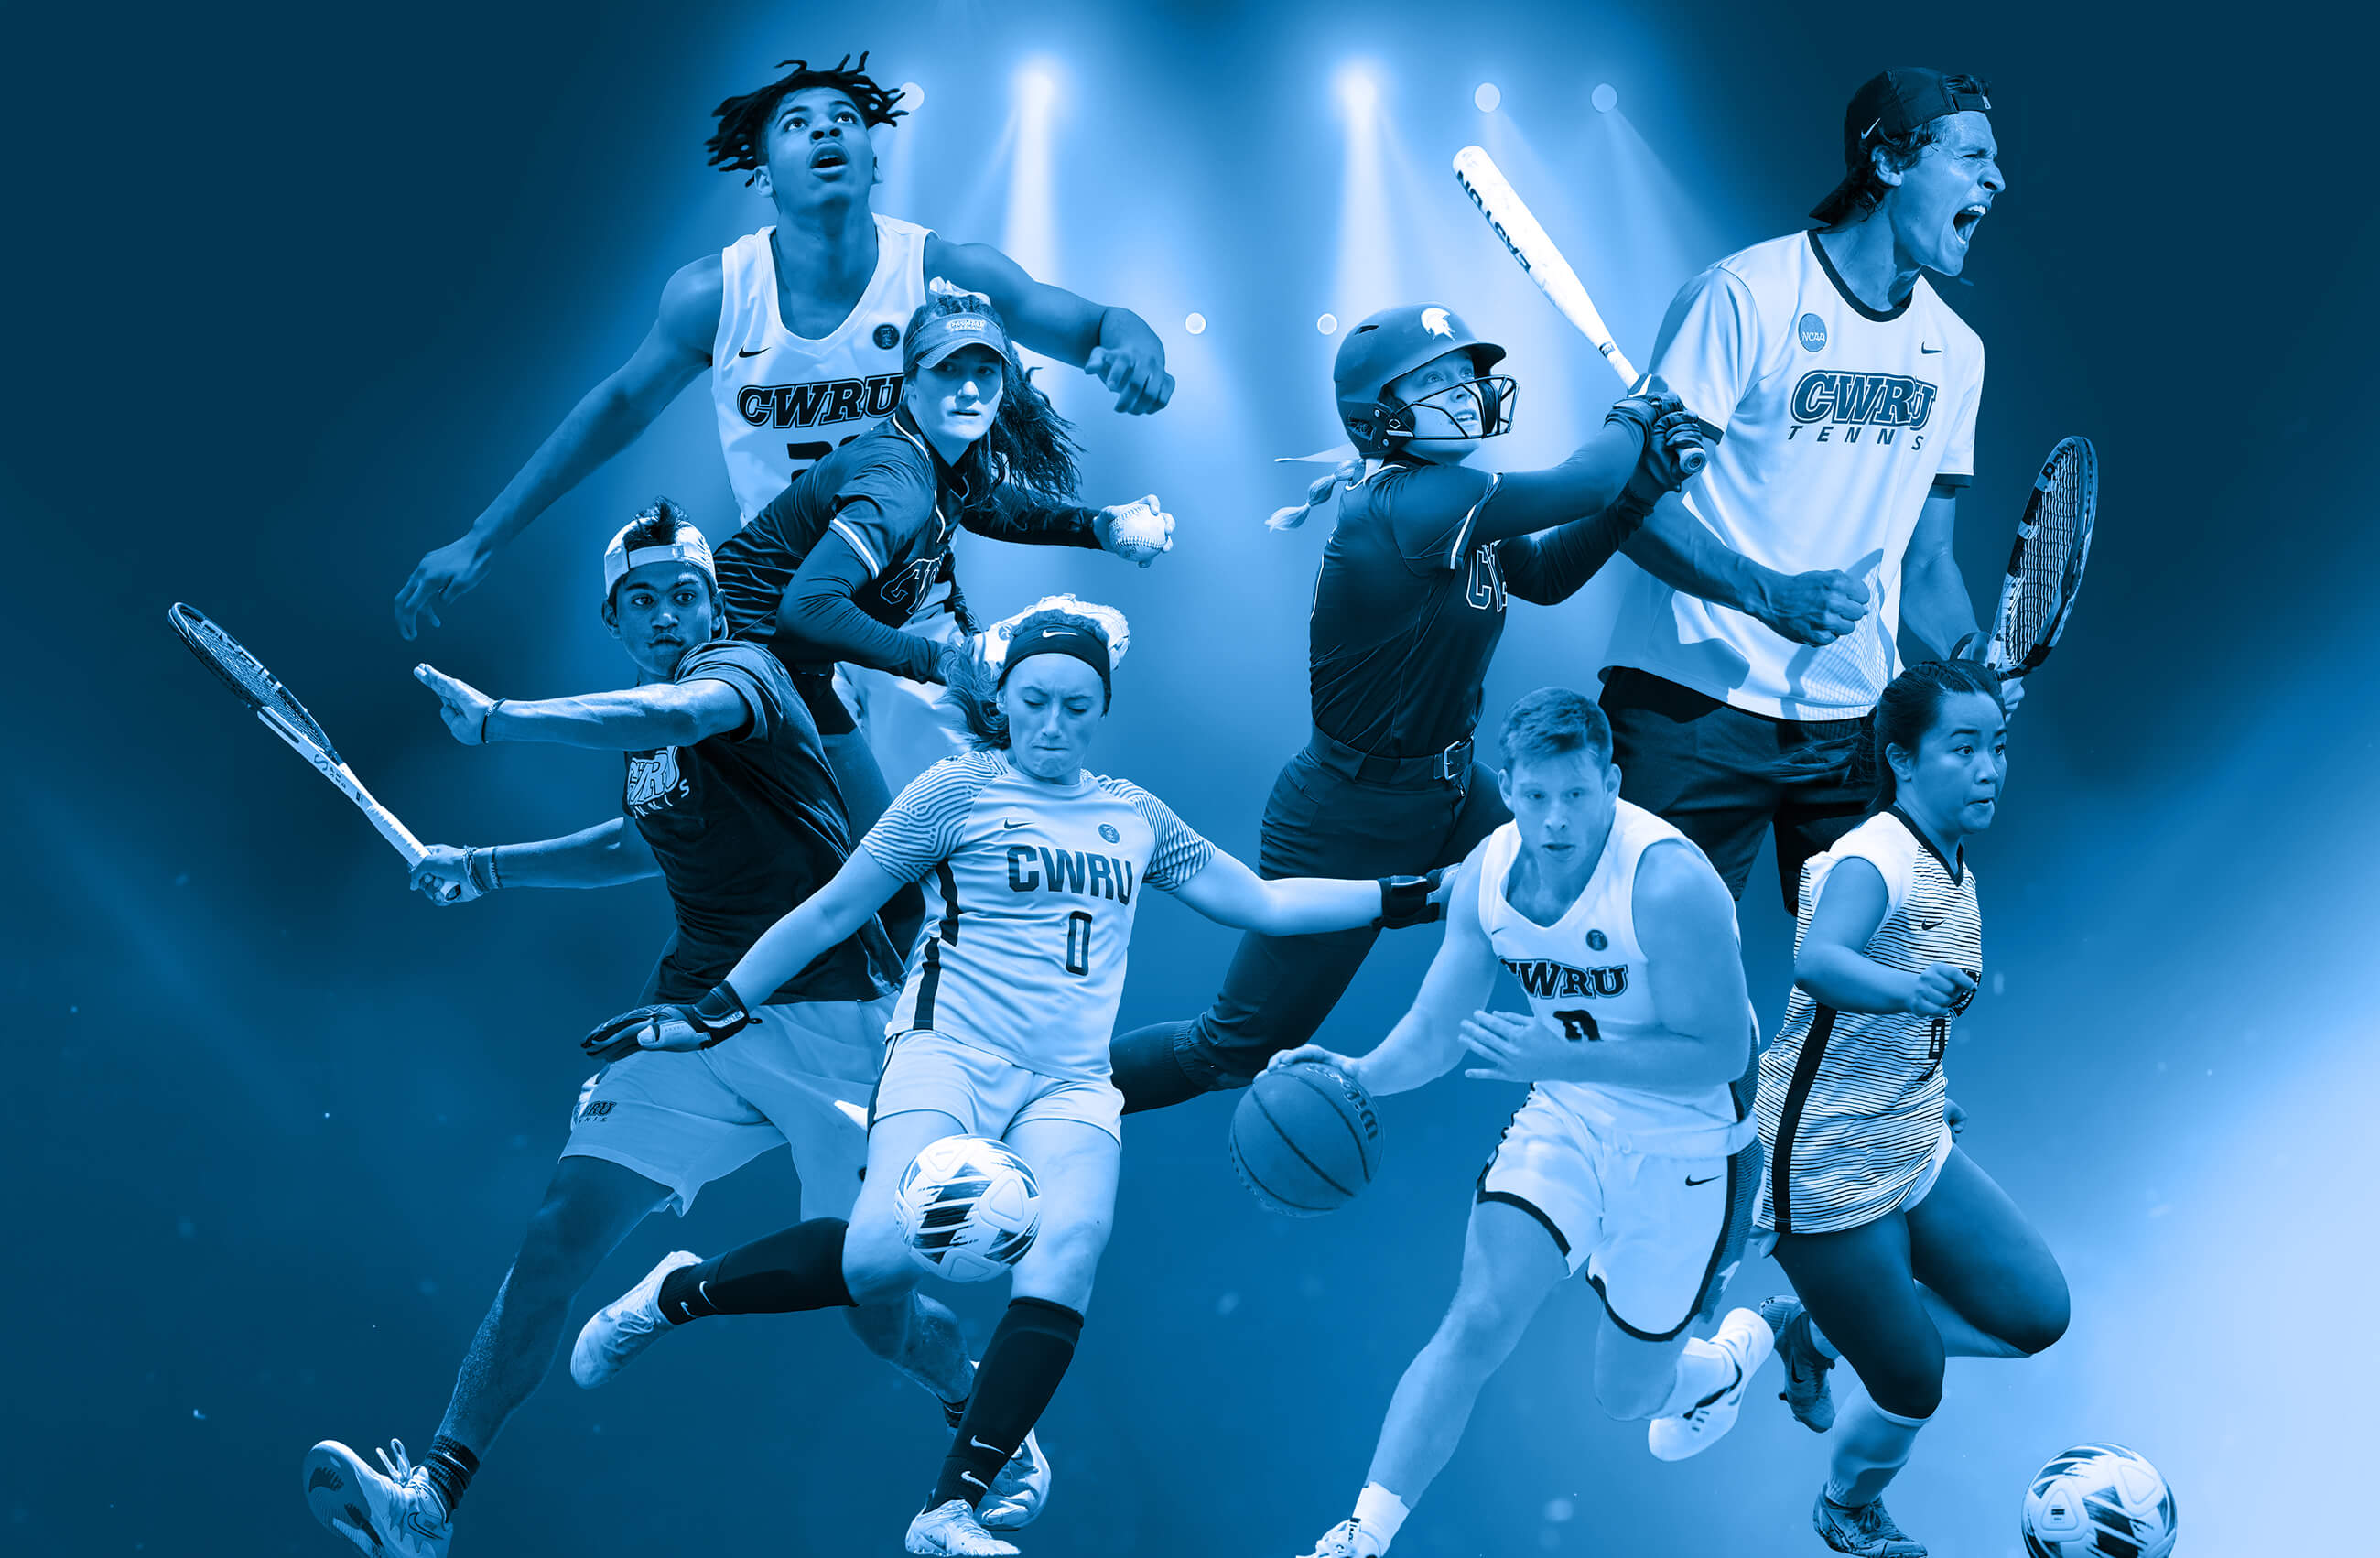 A montage of Case Western Reserve University student athletes in action